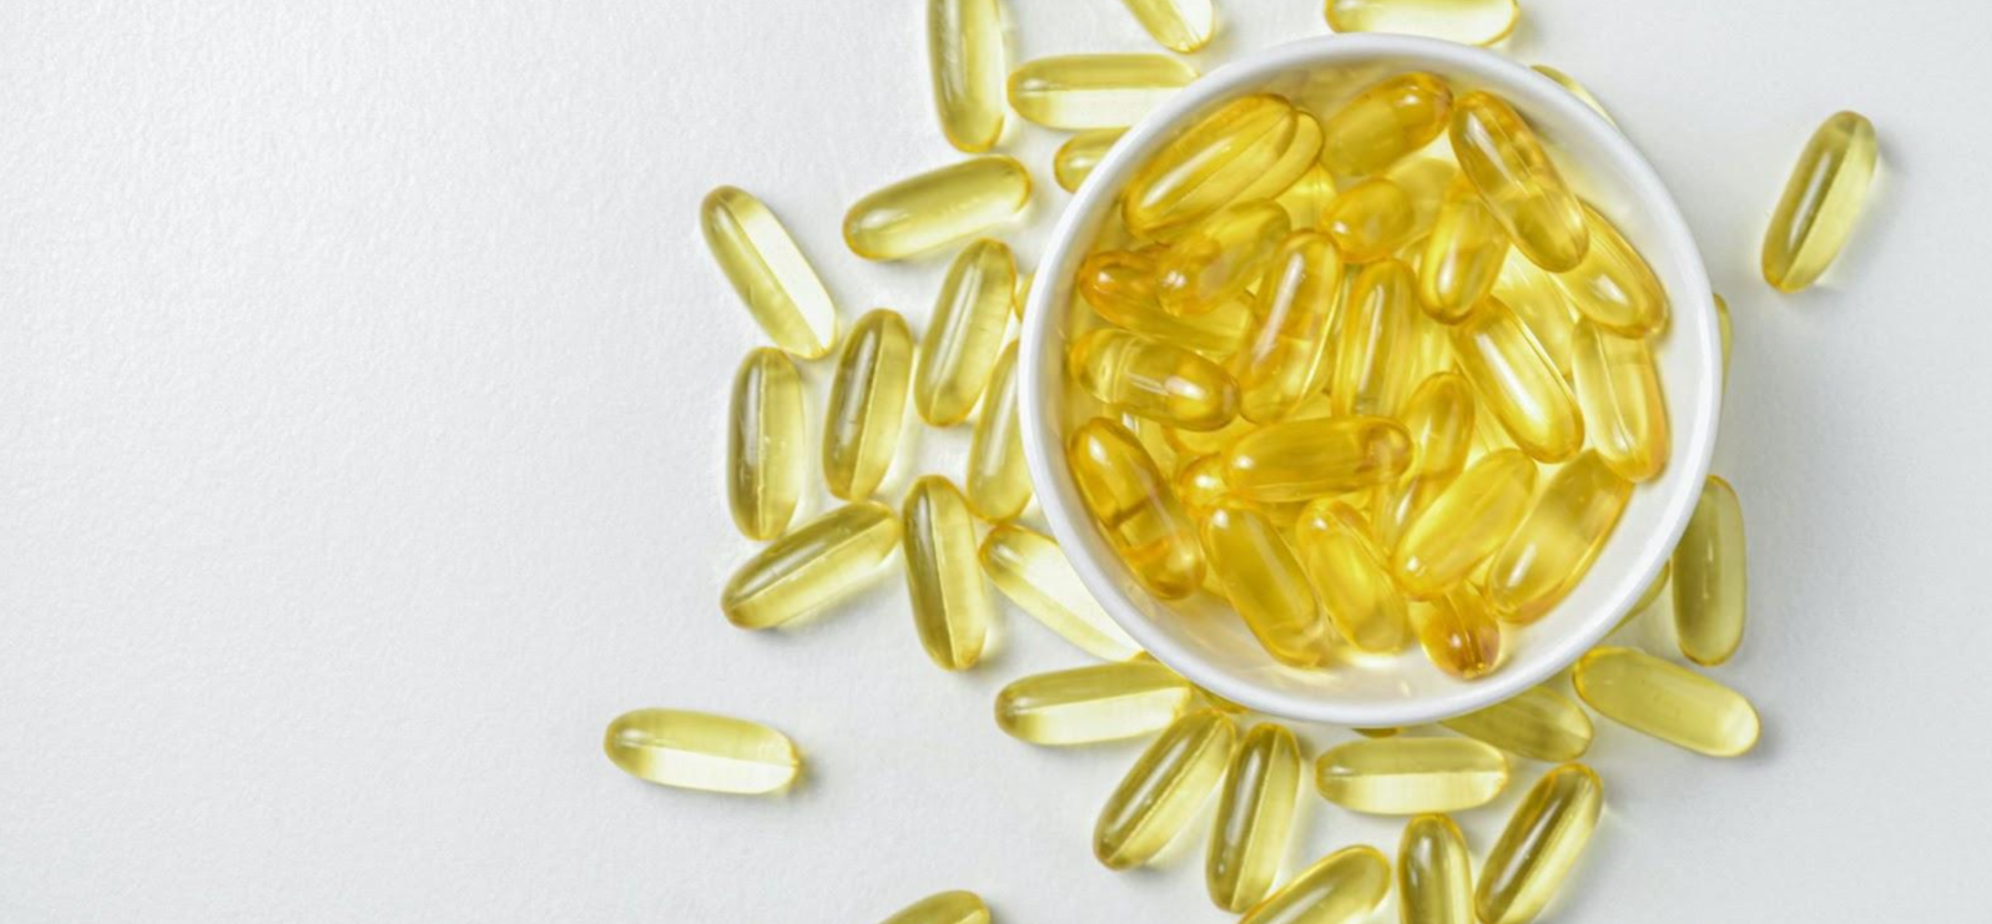 Vitamin D supplements to improve mental health in winter.